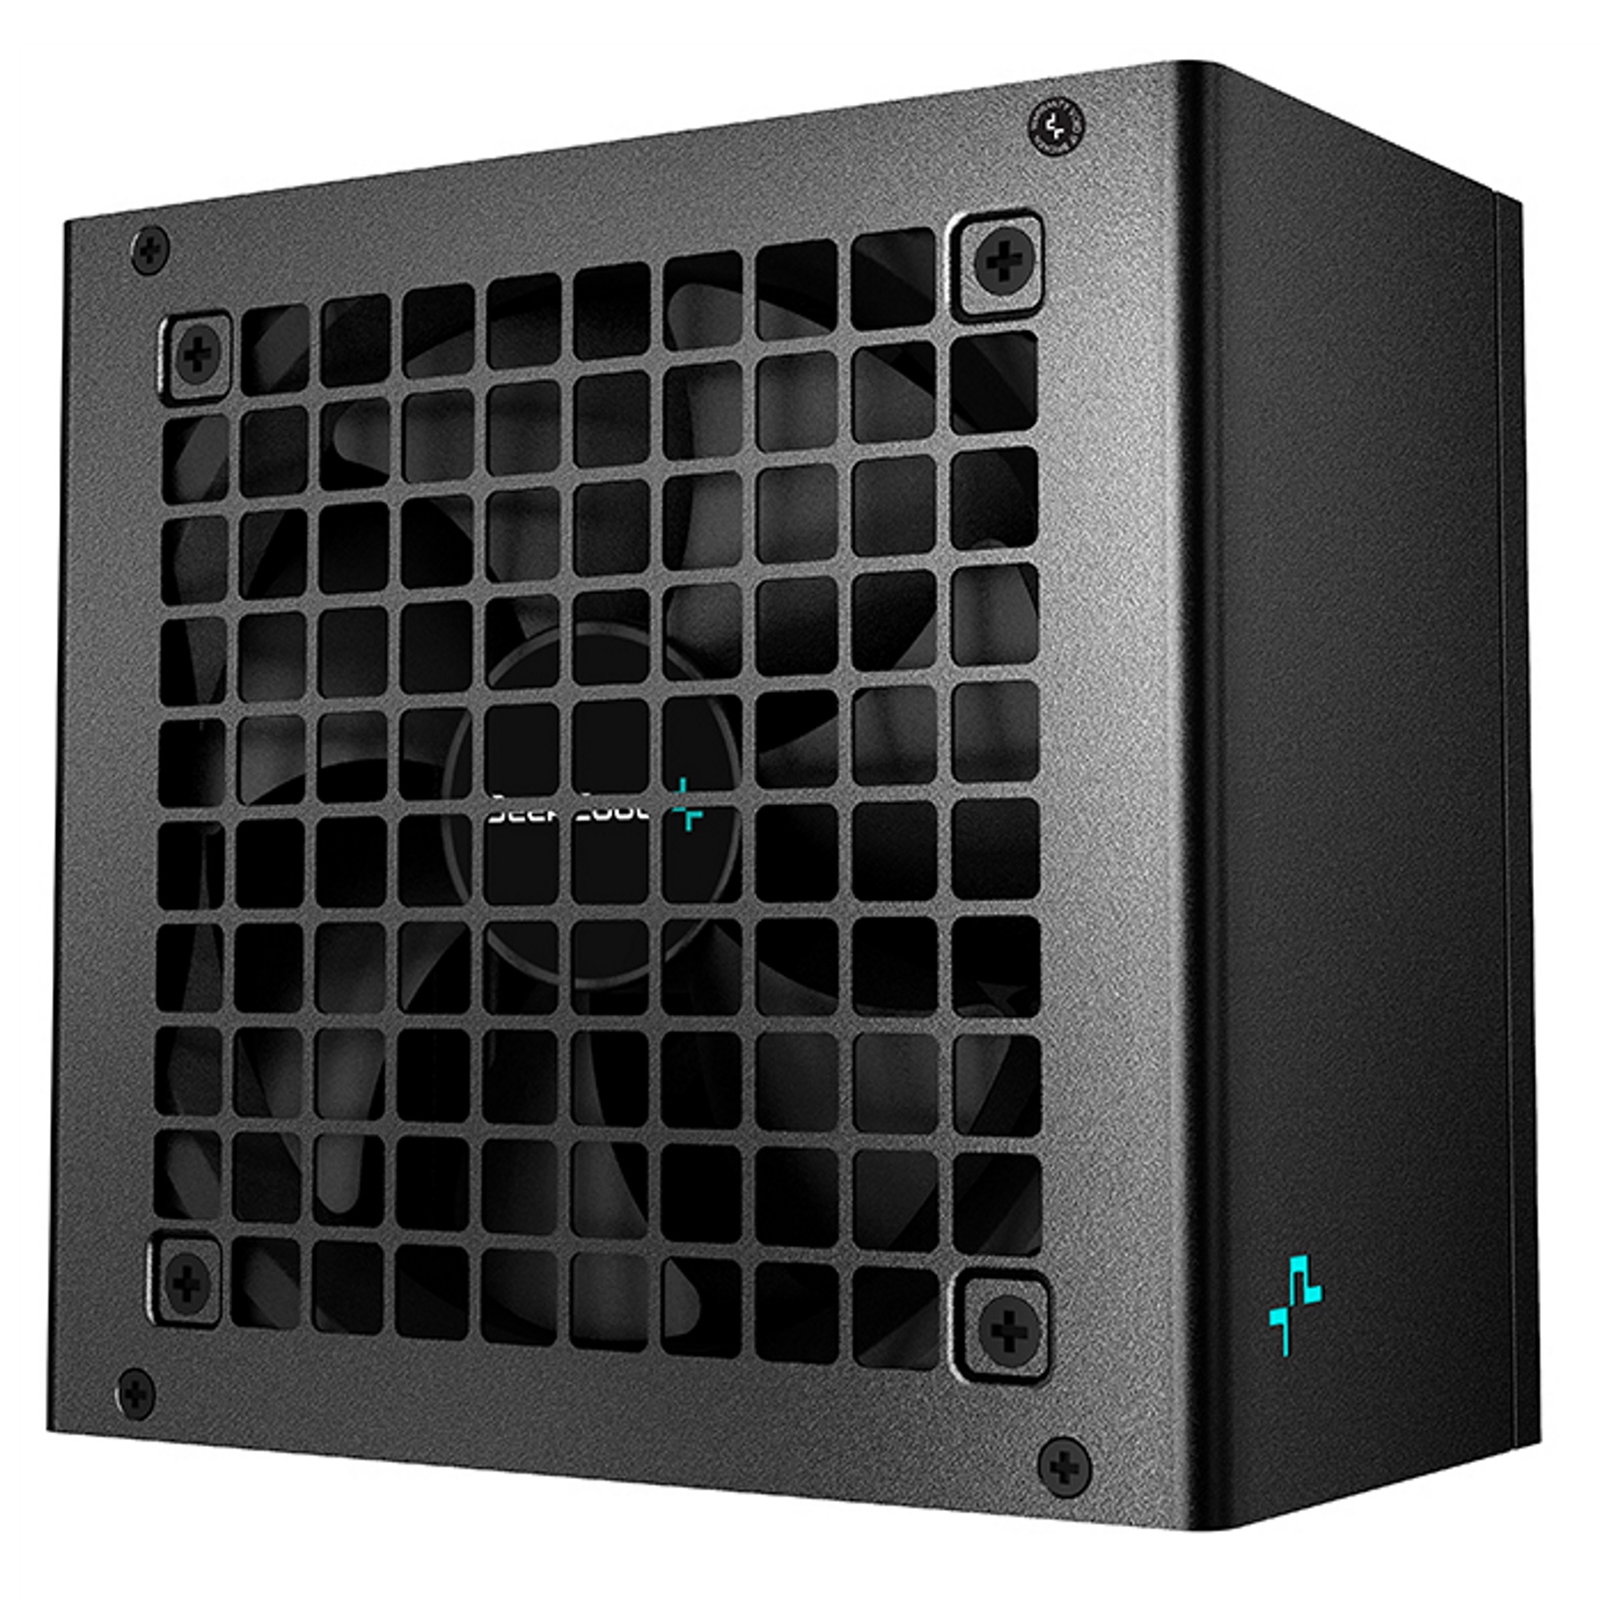 DeepCool PK650D 650W Power Supply Unit, 120mm Silent Hydro Bearing Fan, 80 PLUS Bronze, Non Modular, UK Plug, Flat Black Cables, Stable with Low Noise Performance